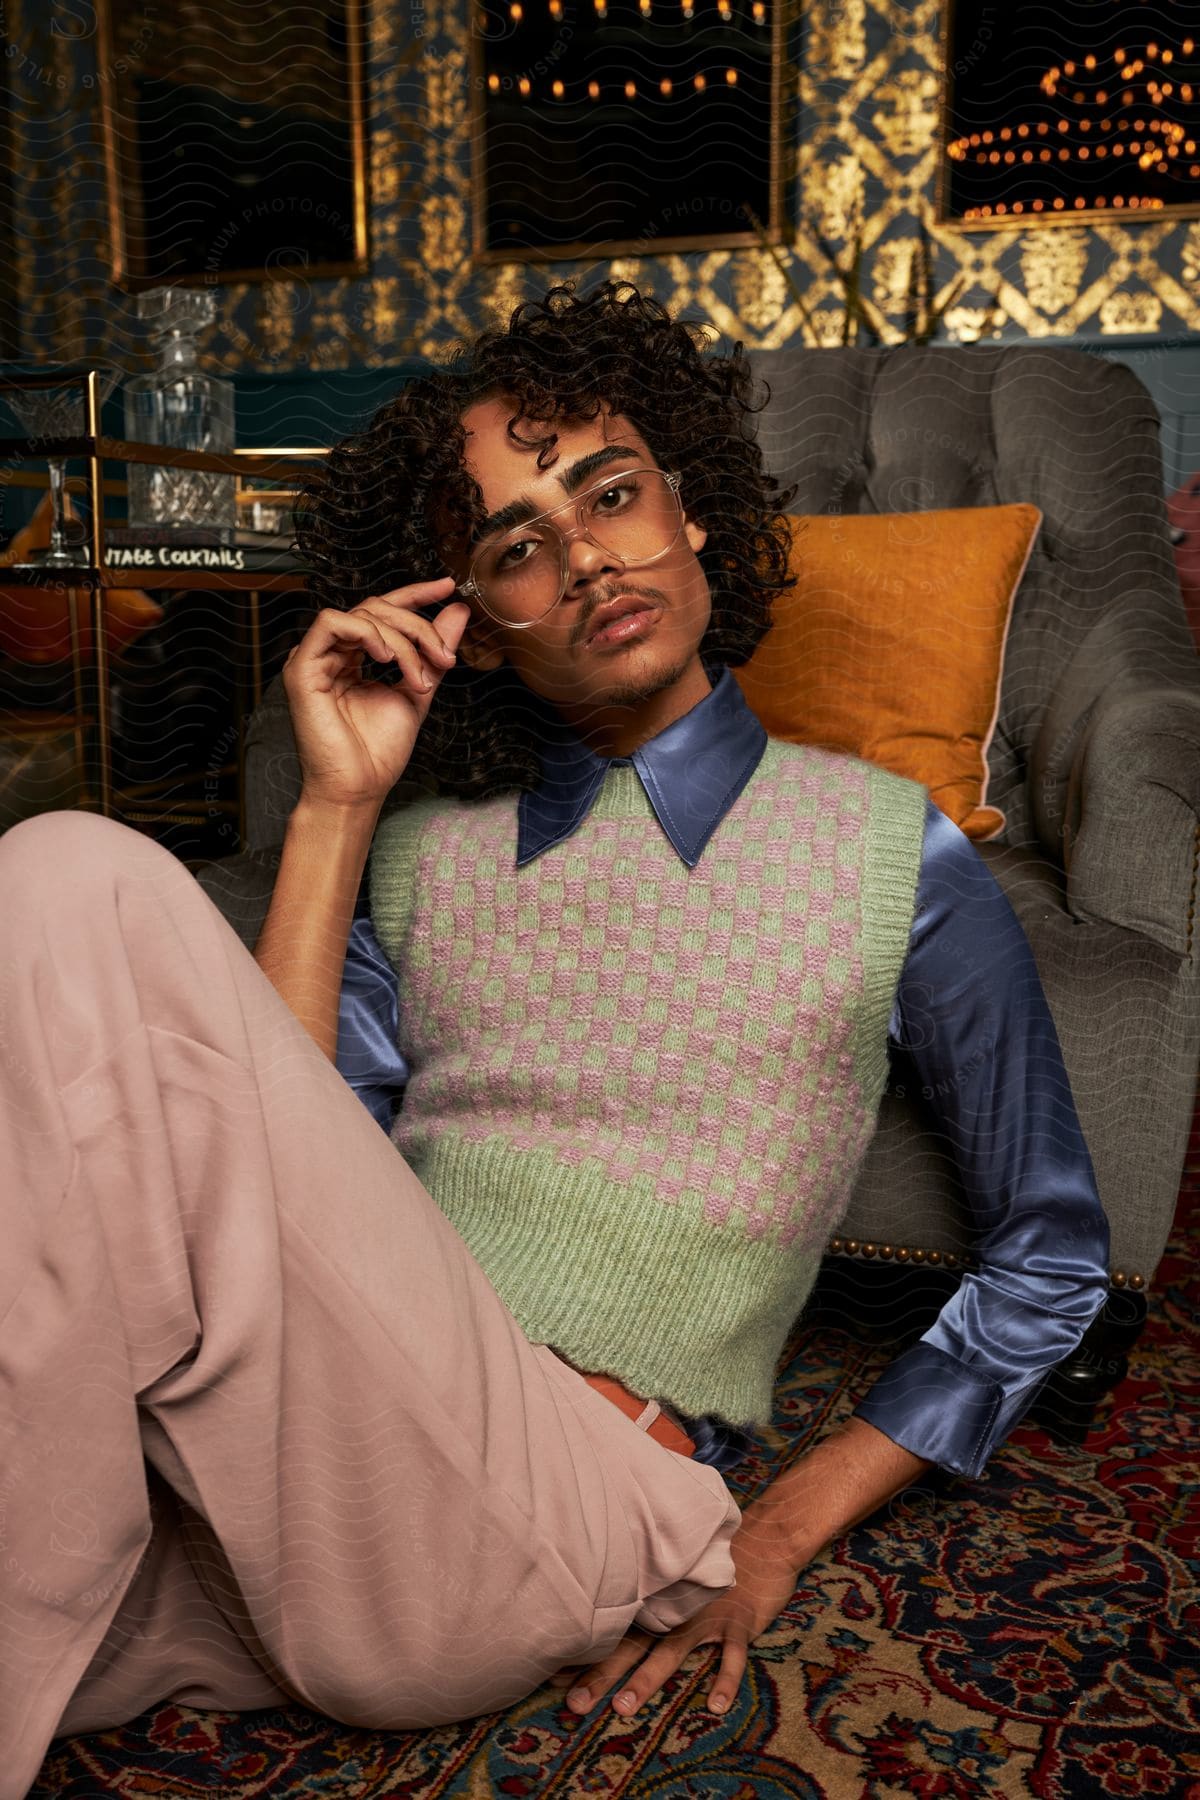 Young man with curly hair with one of his hands on his glasses posing sitting on the carpet in front of an armchair wearing pink pants and a dress shirt and sweater.